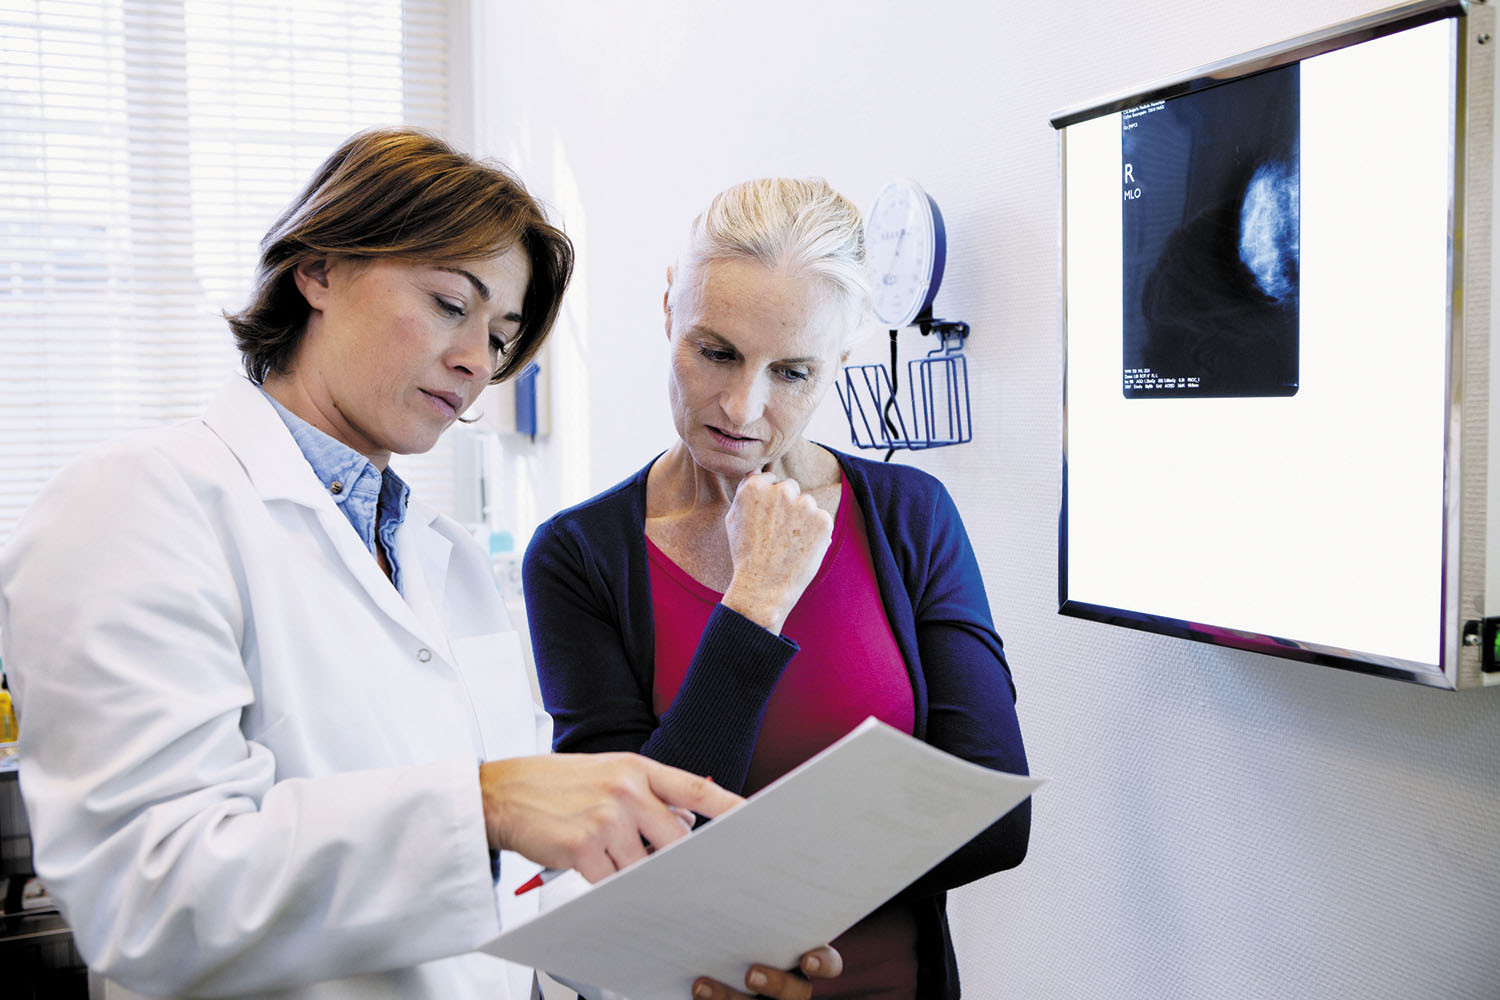 photo of a doctor showing patient the results of a test; doctor is holding papers in her hand, and there is a light box on the wall next to them showing a mammogram